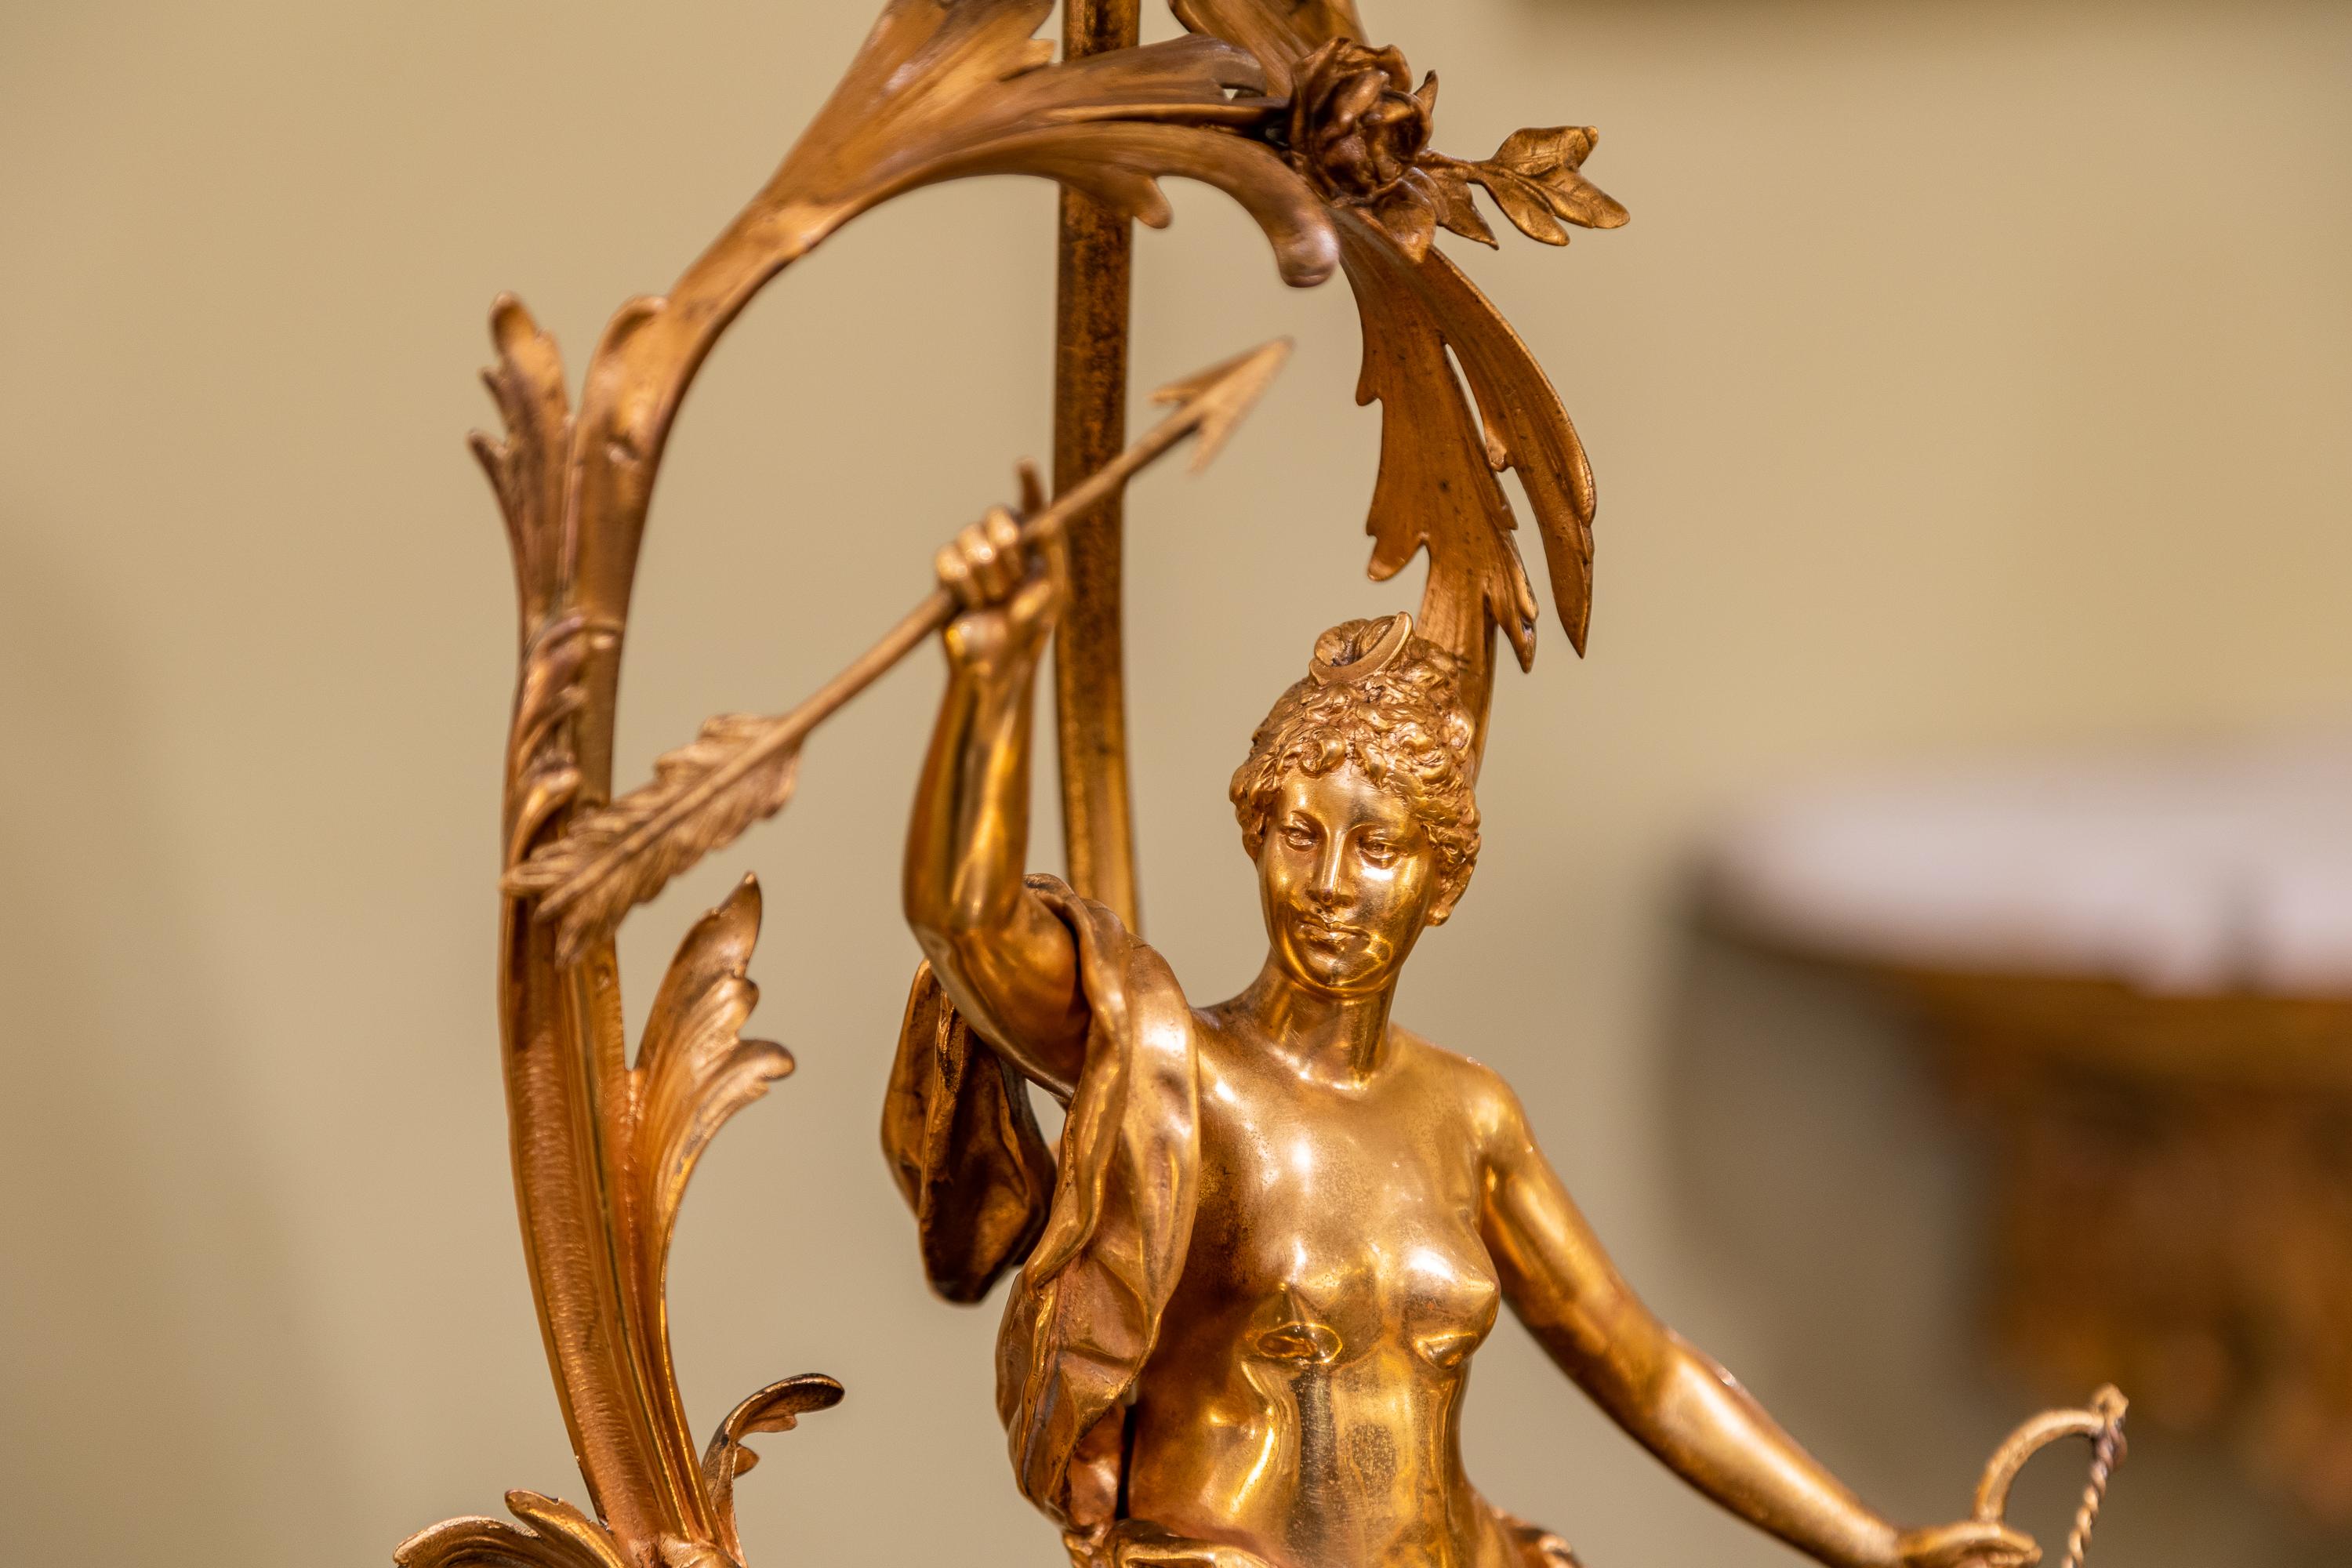 A fine 19th century French Louis XV gilt bronze figural lamp of a female warrior. Possibly Diana Goddess of the hunt. Signed Moreau